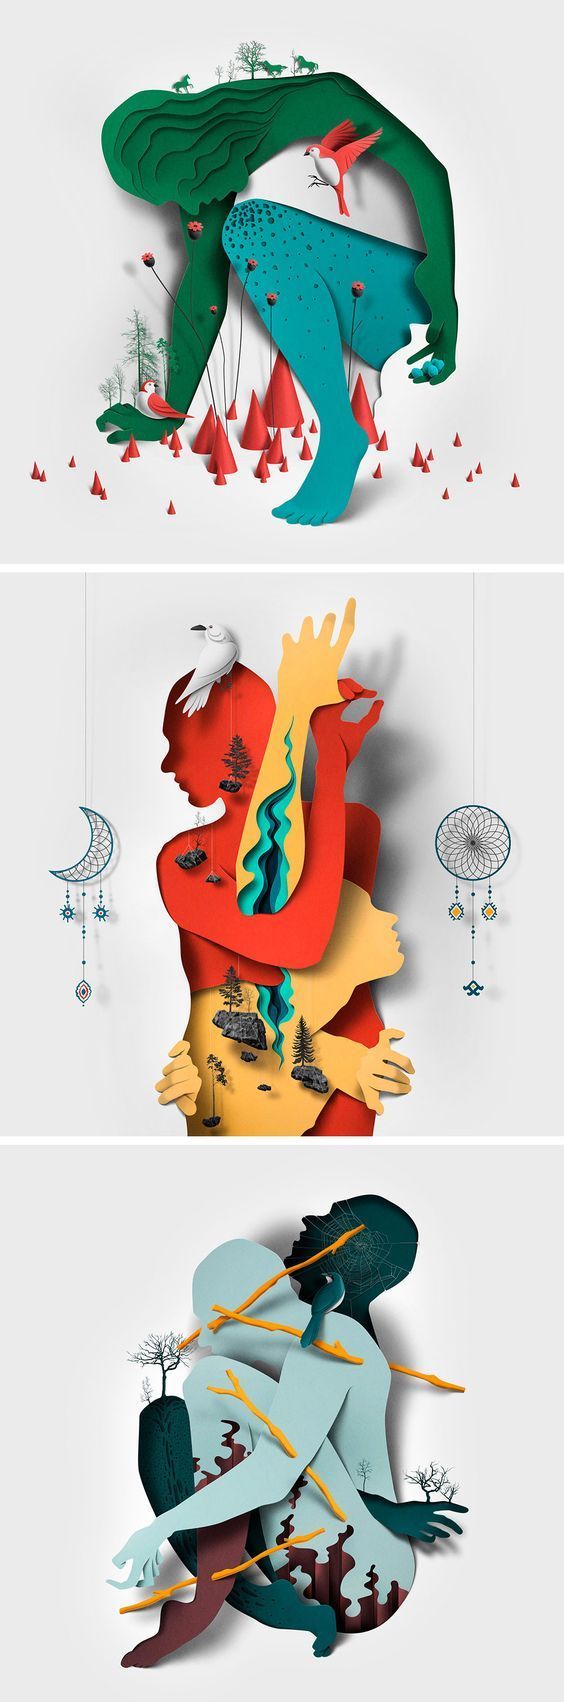 New Editorial Illustrations Incorporating Cut Paper Textures and Shadows by Eiko Ojala: